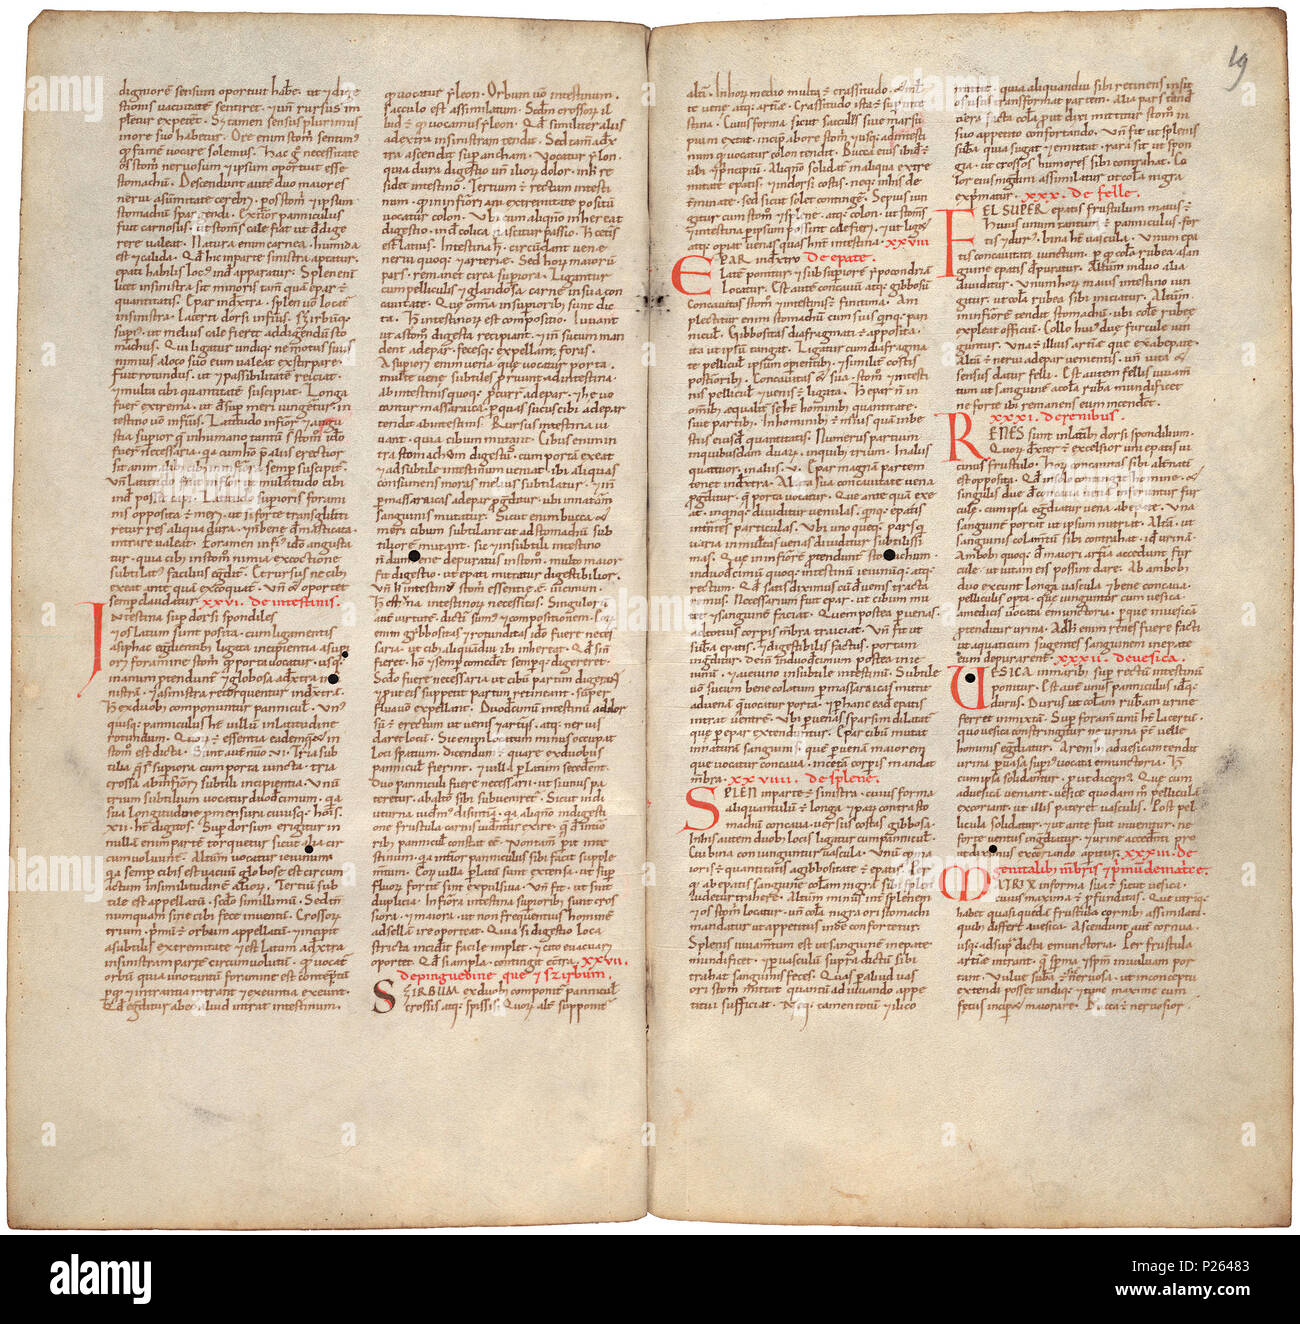 . Pantegni pars prima theorica (lib. I-X) - folios 018v (left) and 019r (right)  .  Lefthand side folio 018v; righthand side folio 019r from an 11th century copy of the Liber pantegni. This is the earliest known copy (prior to 1086) of the Liber pantegni, made at Monte Cassino under the supervision of Constantine the African. It is dedicated to Abbot Desiderius of Monte Cassino (1027-1087), before he became Pope Victor III. Read backgroud information in Dutch and in English. . Constantine the African (ca. 1010-1098/9) 175 Liber pantegni - KB 73 J 6 - folios 018v (left) and 019r (right) Stock Photo